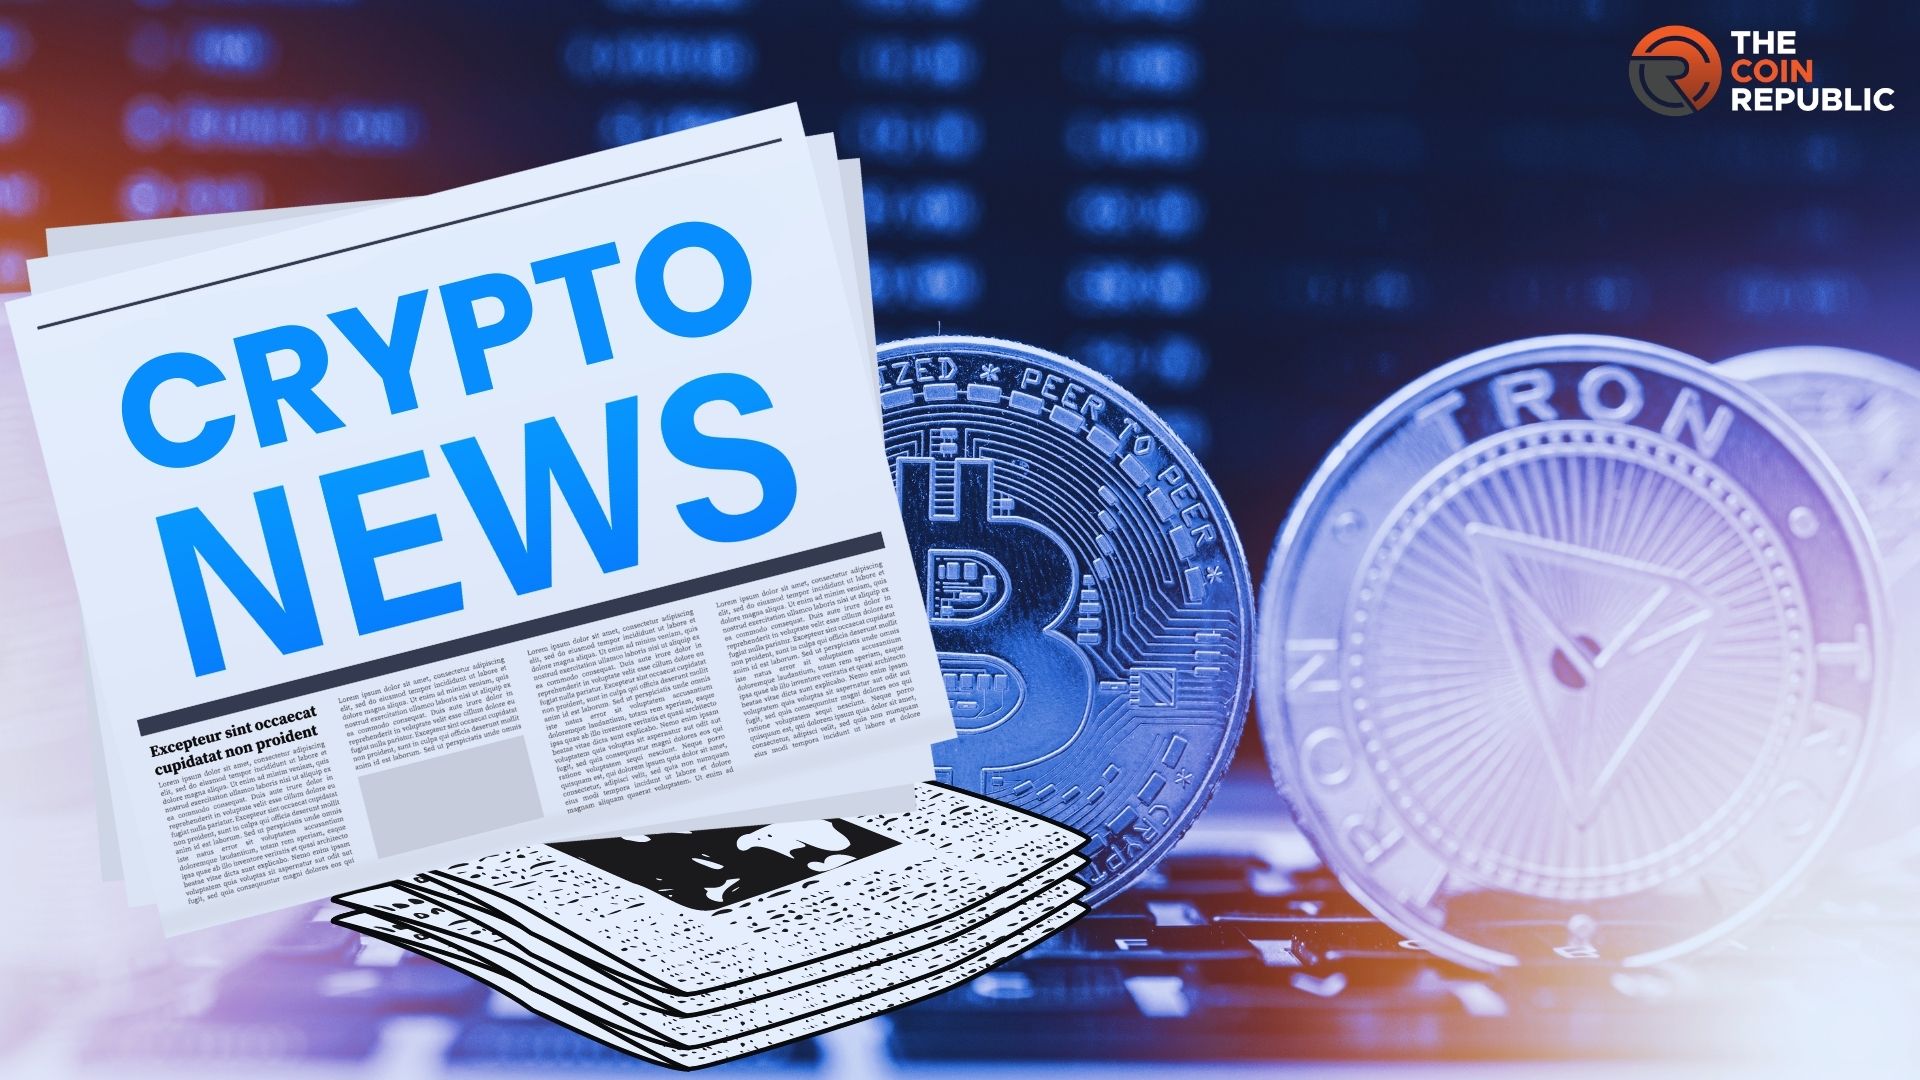 Top Crypto News That Grabbed Attention of Investors This Week